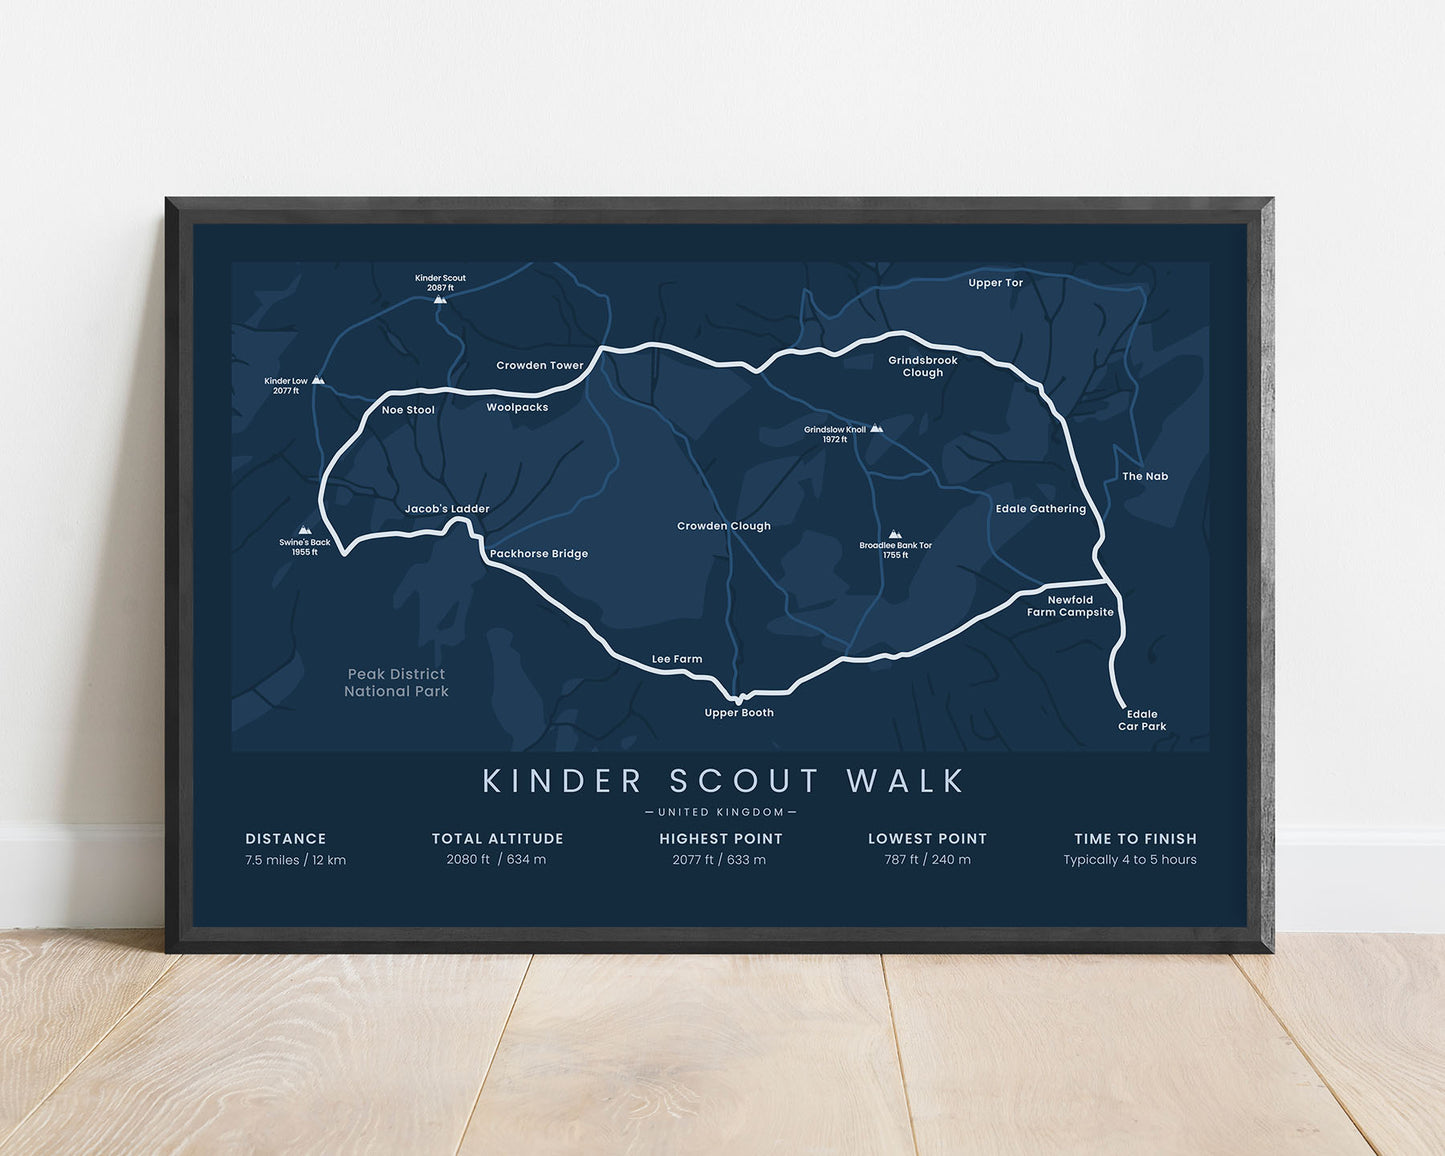 Kinder Scout Circular Walk (Moorland Plateau) route print with blue background